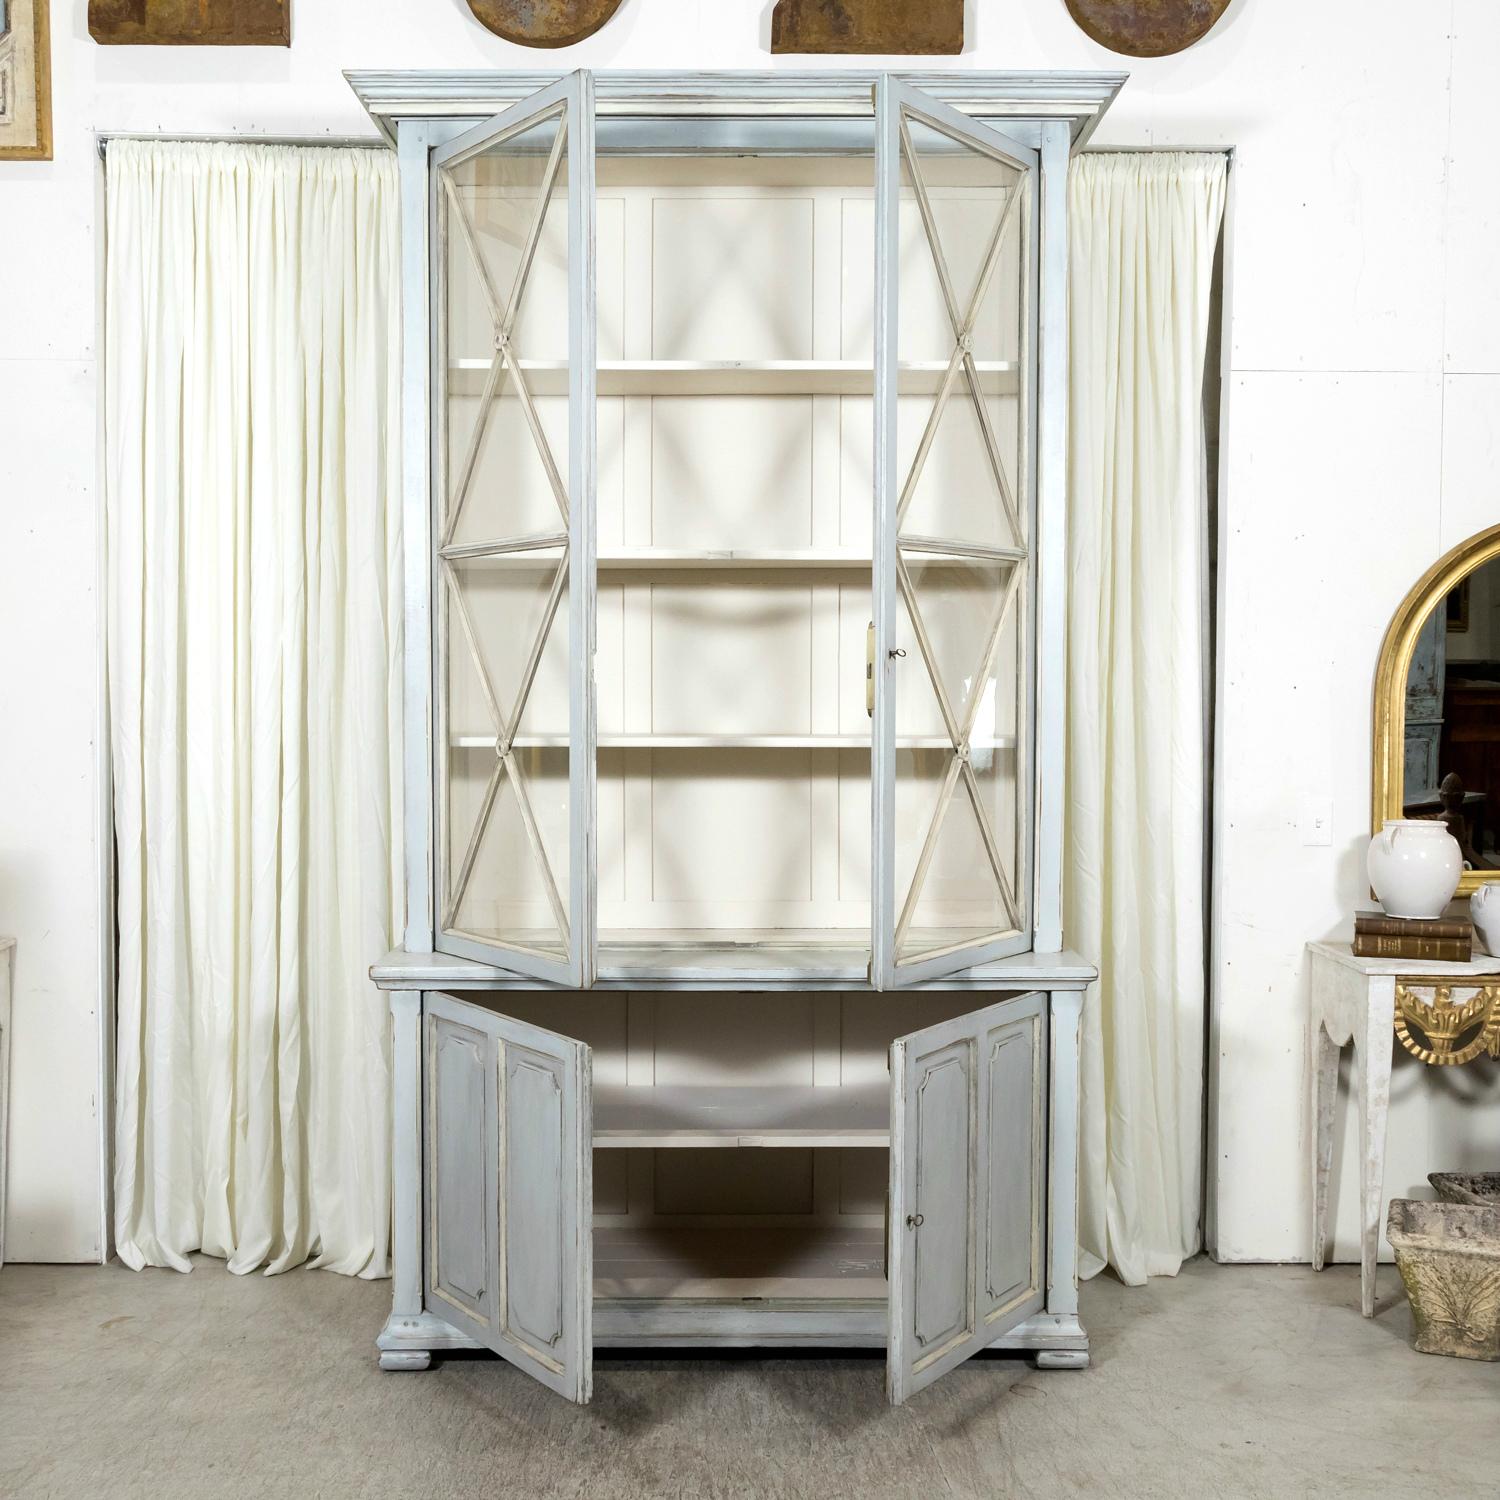 This exceptional mid-19th century French Directoire period painted bookcase or display cabinet from Gordes, circa early 1800s, embodies the elegance and craftsmanship of its era. Handcrafted by skilled artisans in the renowned Provençal city of